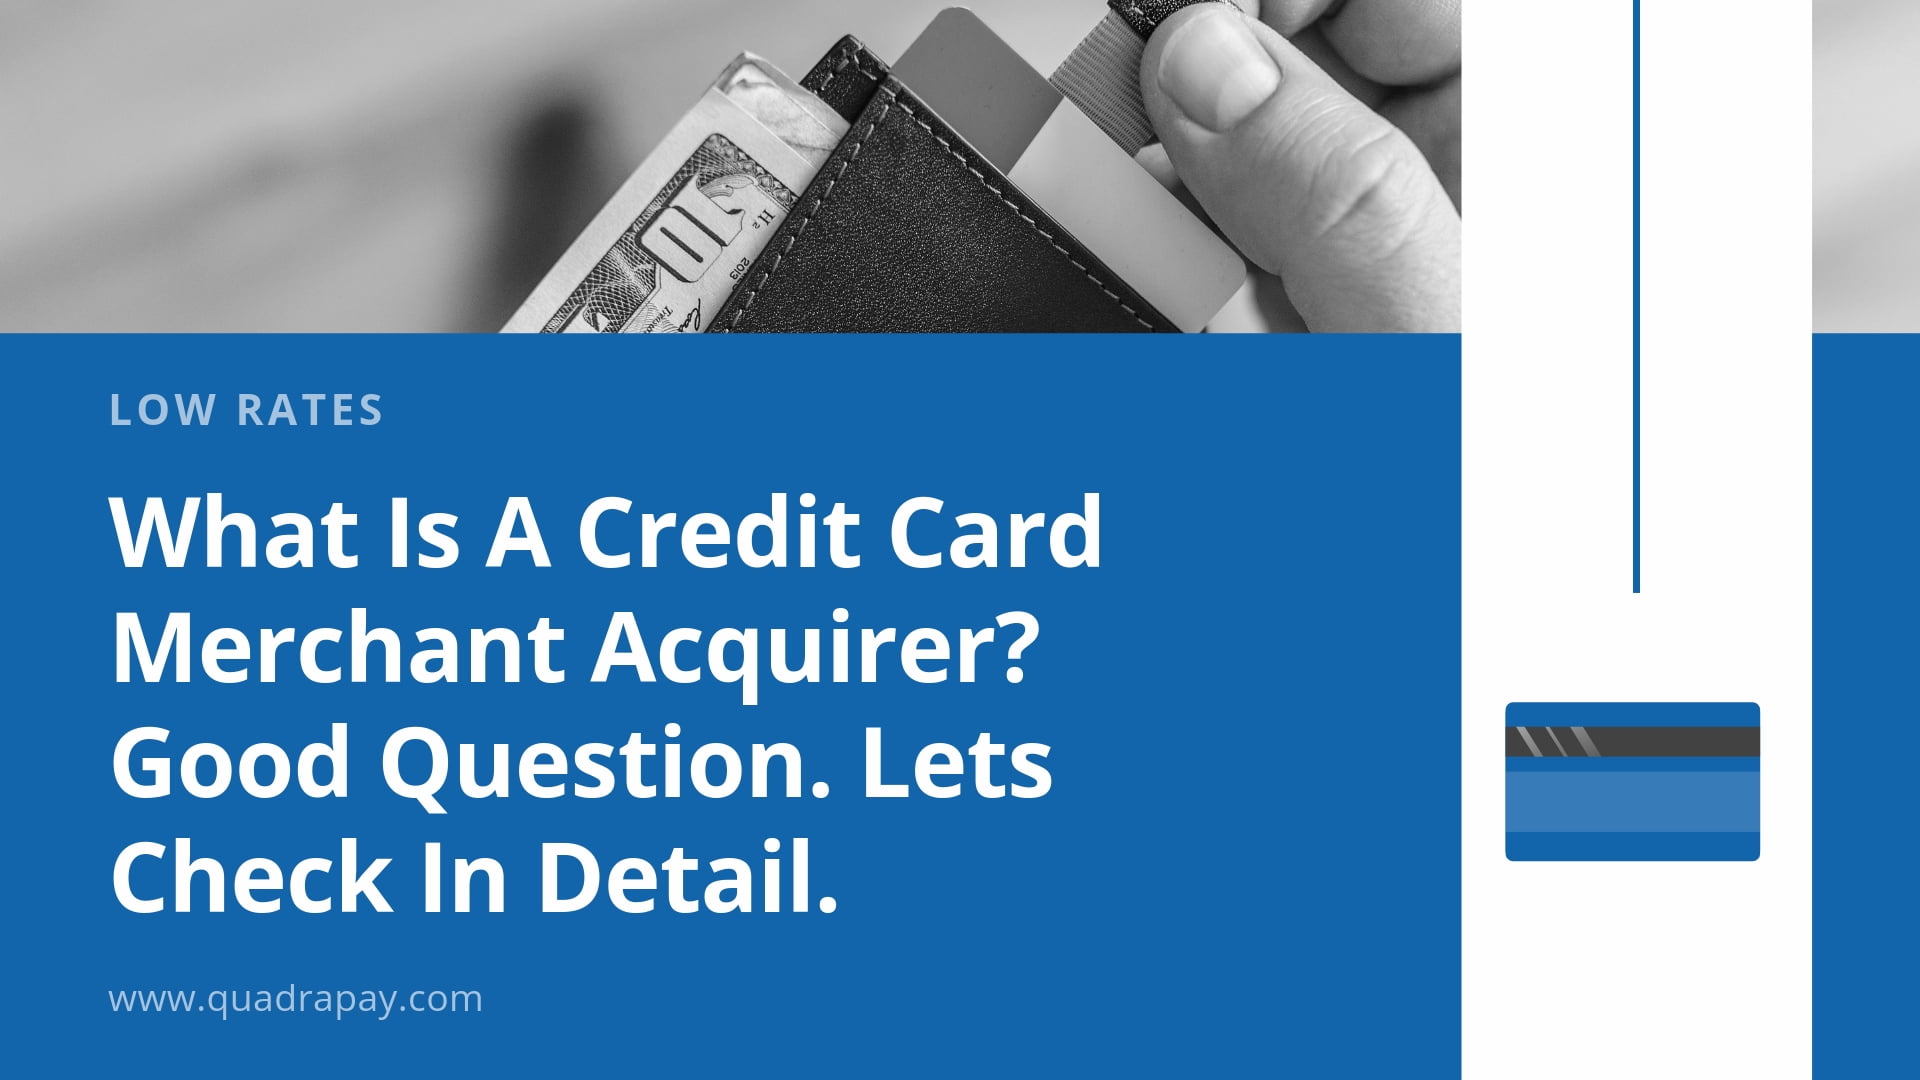 Credit Card Merchant Acquirer BY Quadrapay